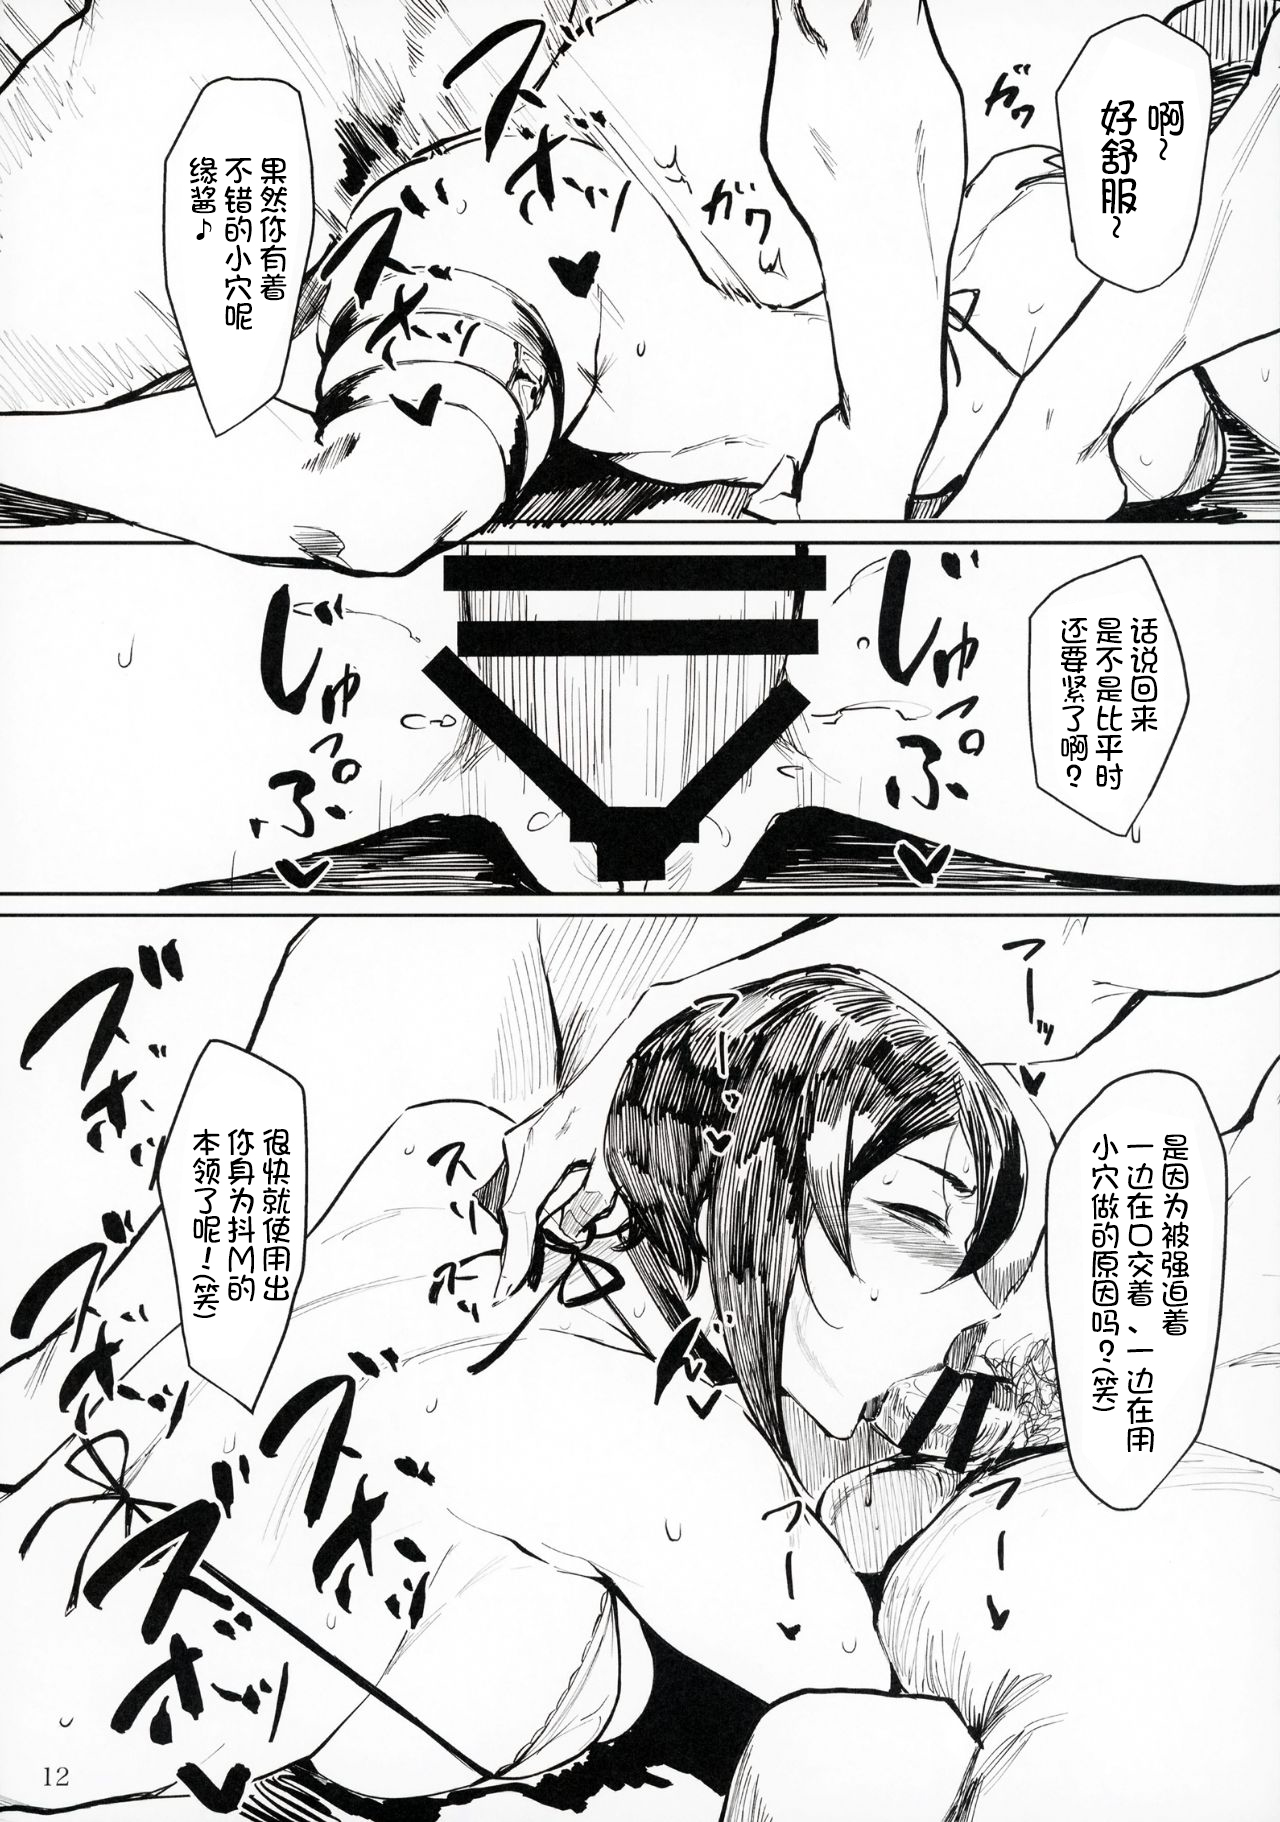 (COMITIA124) [Isocurve (Allegro)] Yukari Special EXtra FRIEND + Omake Paper [Chinese] [不咕鸟汉化组] page 11 full